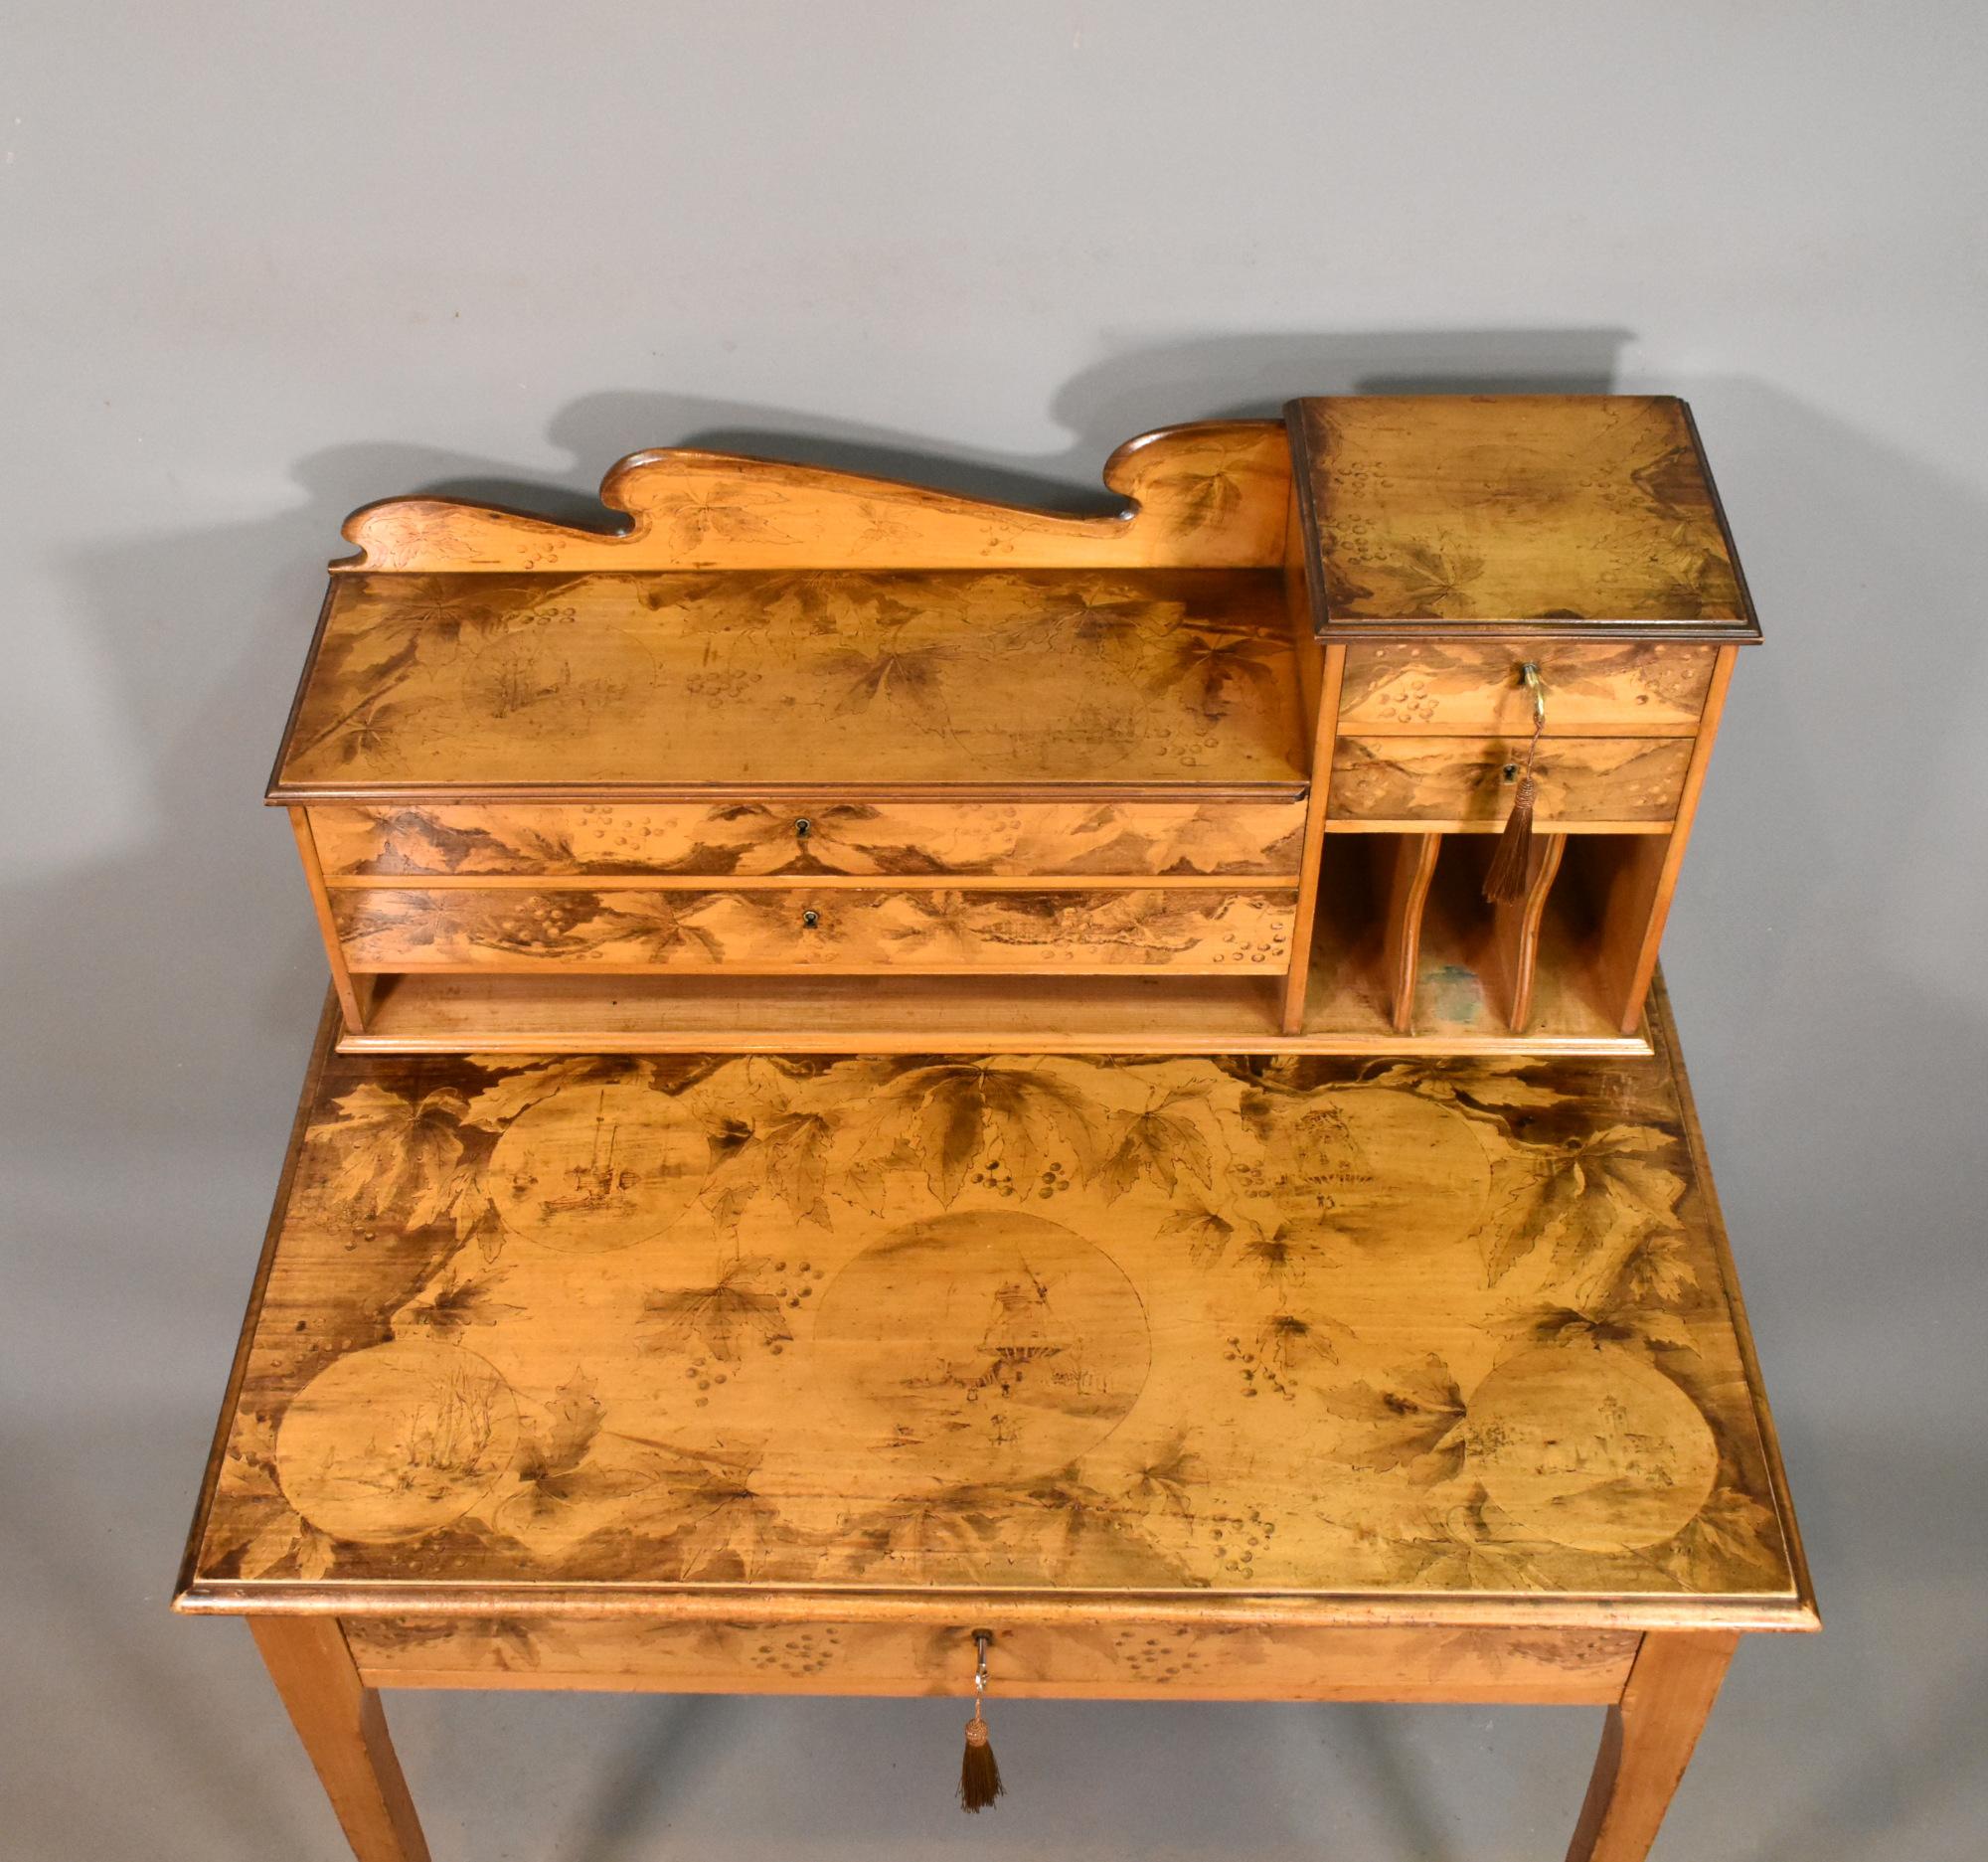 Beech Art Nouveau Tiered Pyrography Etched Desk